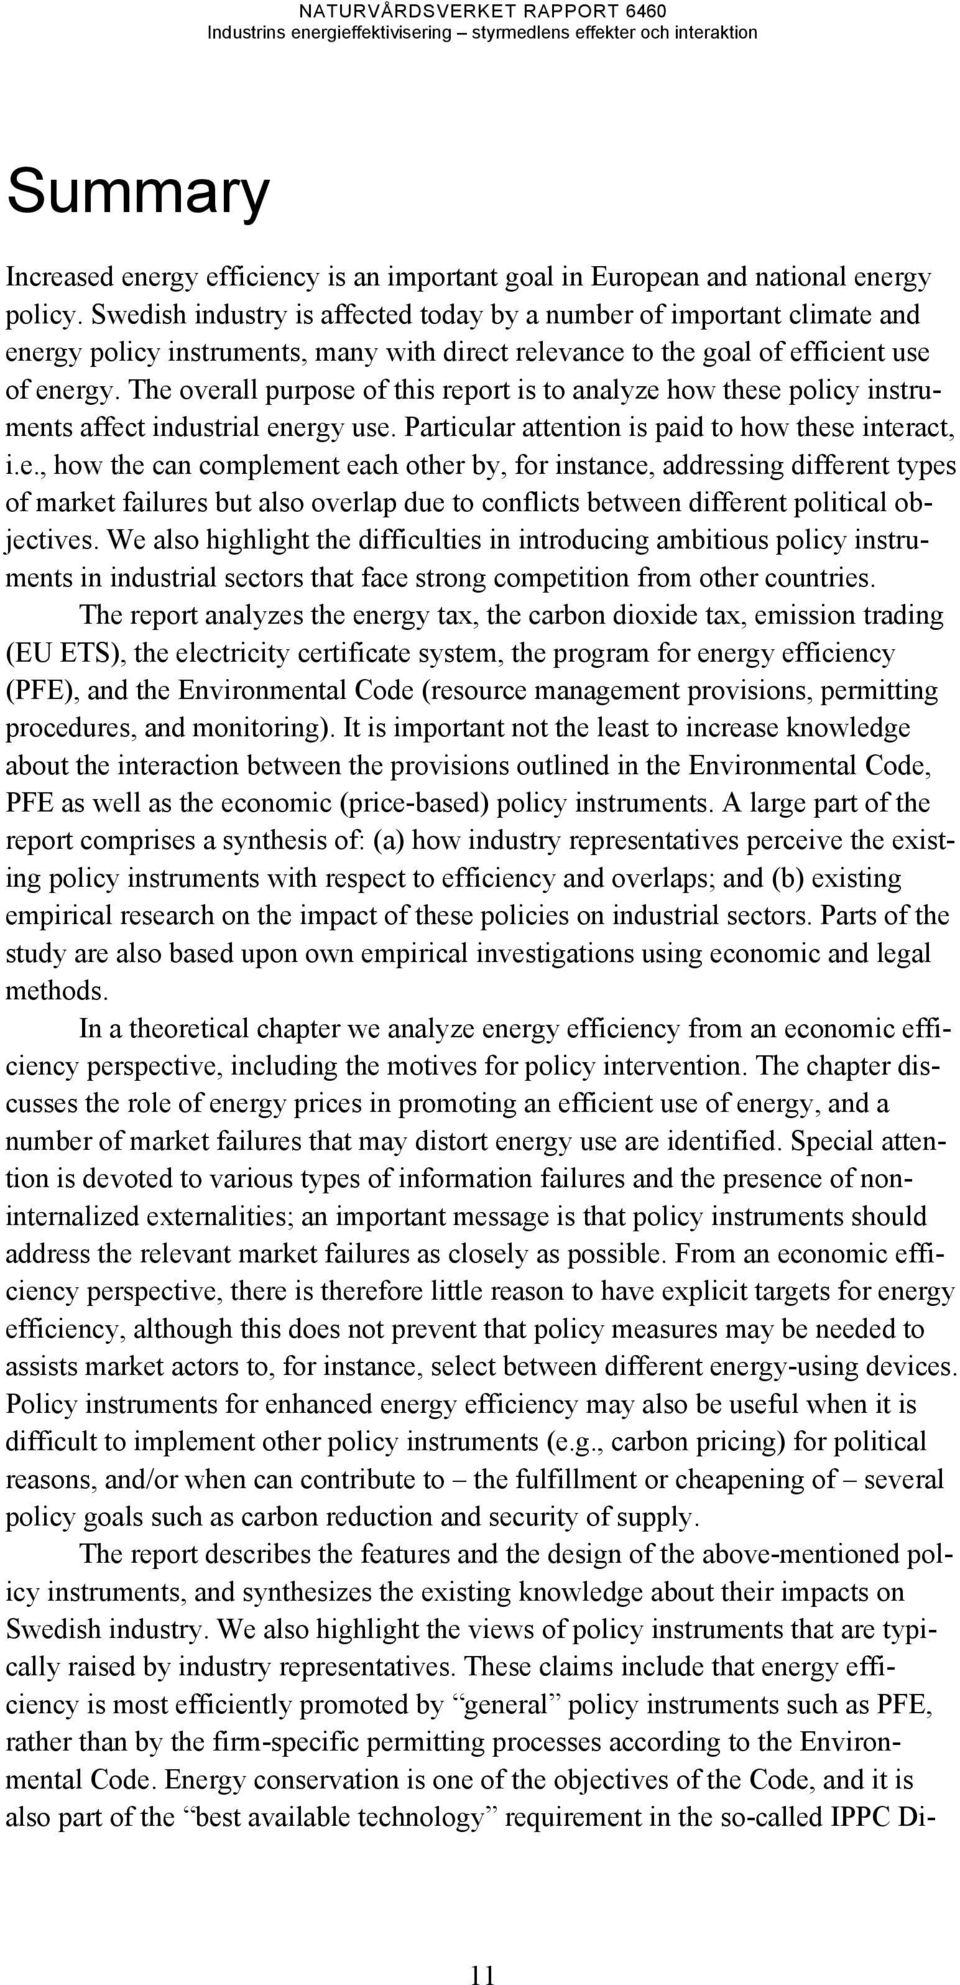 The overall purpose of this report is to analyze how these policy instruments affect industrial energy use. Particular attention is paid to how these interact, i.e., how the can complement each other by, for instance, addressing different types of market failures but also overlap due to conflicts between different political objectives.